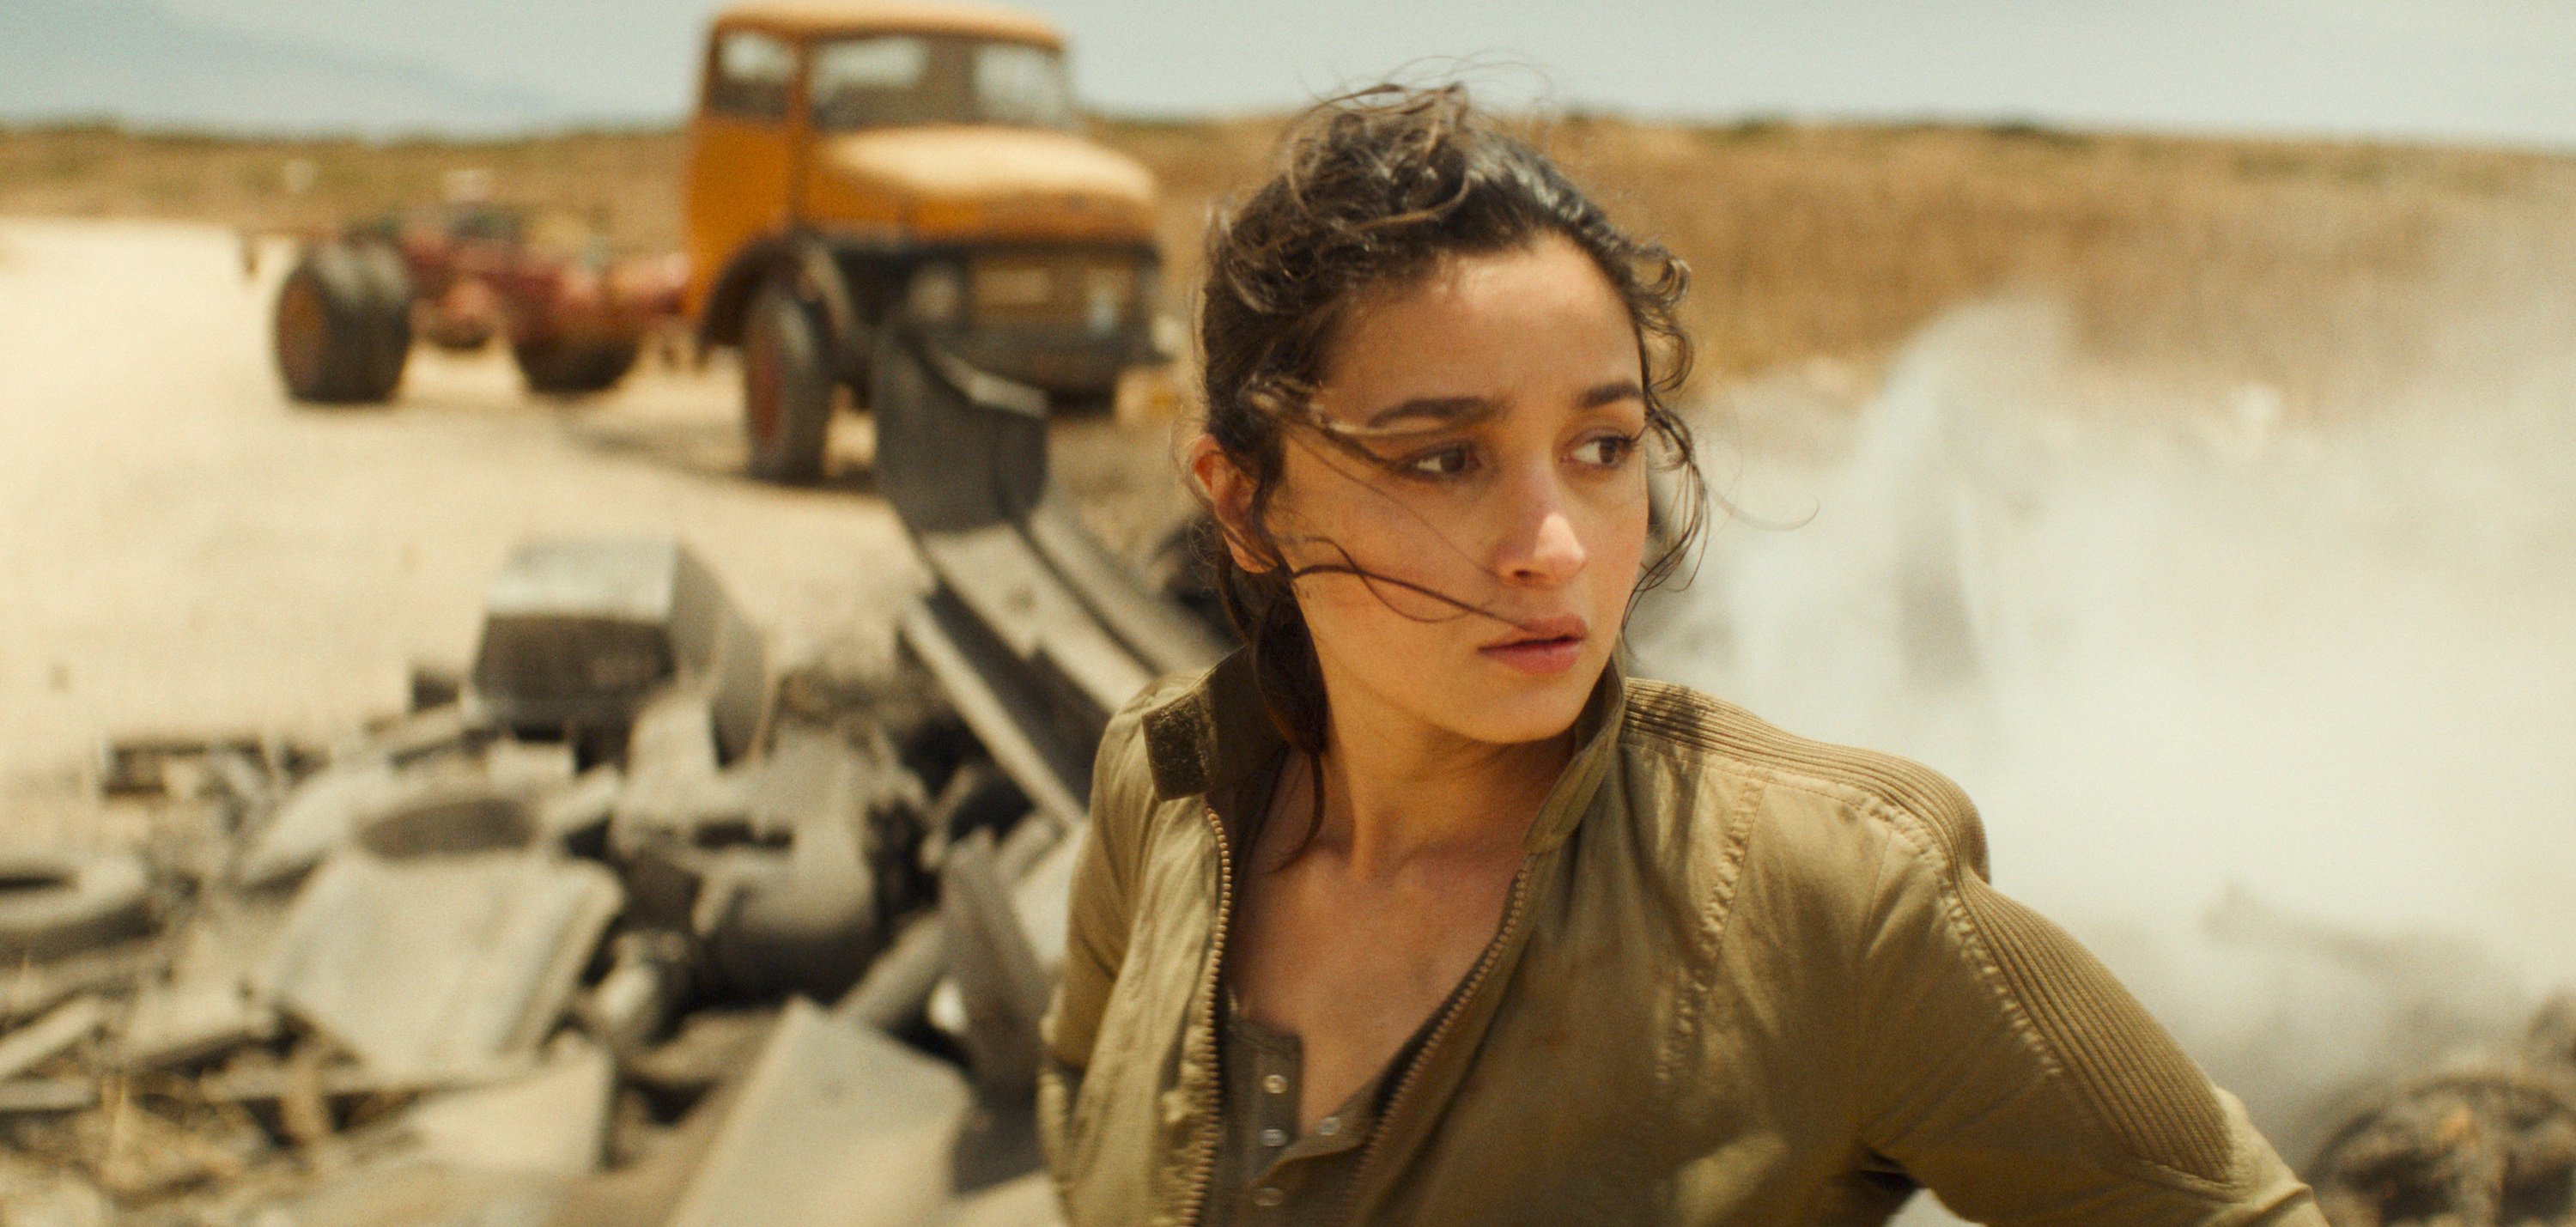 Alia Bhatt in a scene from “Heart of Stone”. The Bollywood superstar with nearly 79 million Instagram followers has made her Hollywood debut. Photo: Netflix via AP